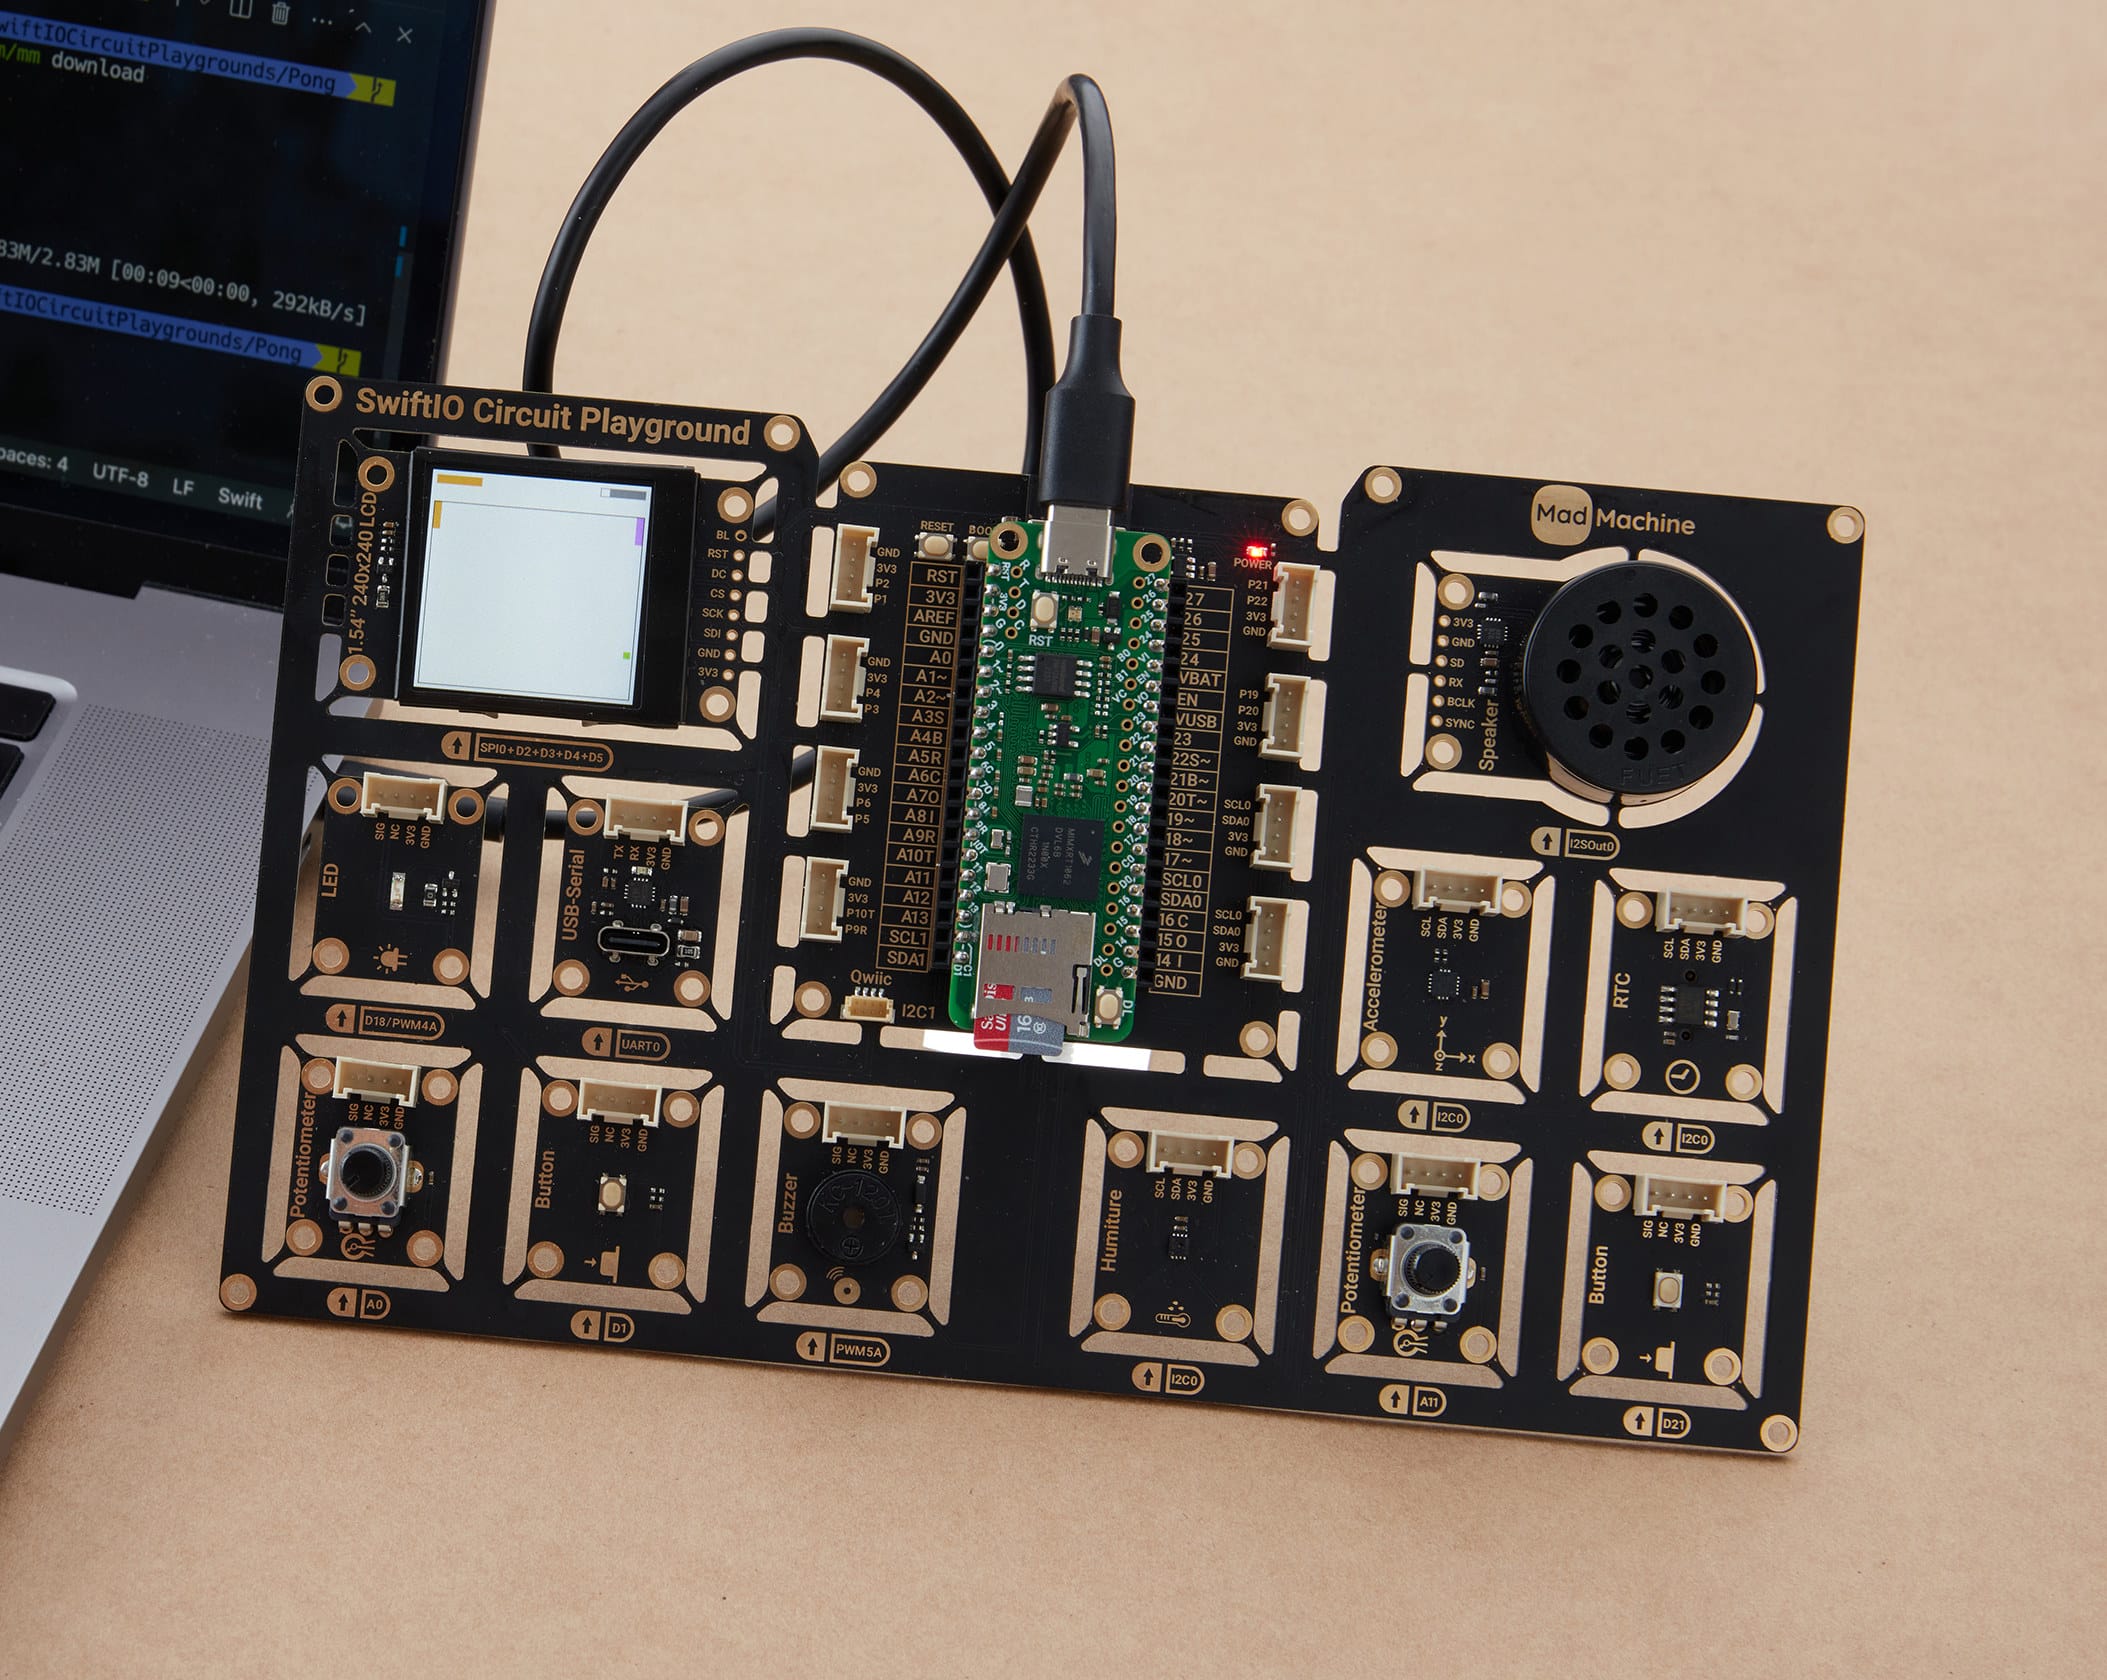 SwiftIO Circuit Playground relies on Apple Swift programming for IoT projects (Crowdfunding)